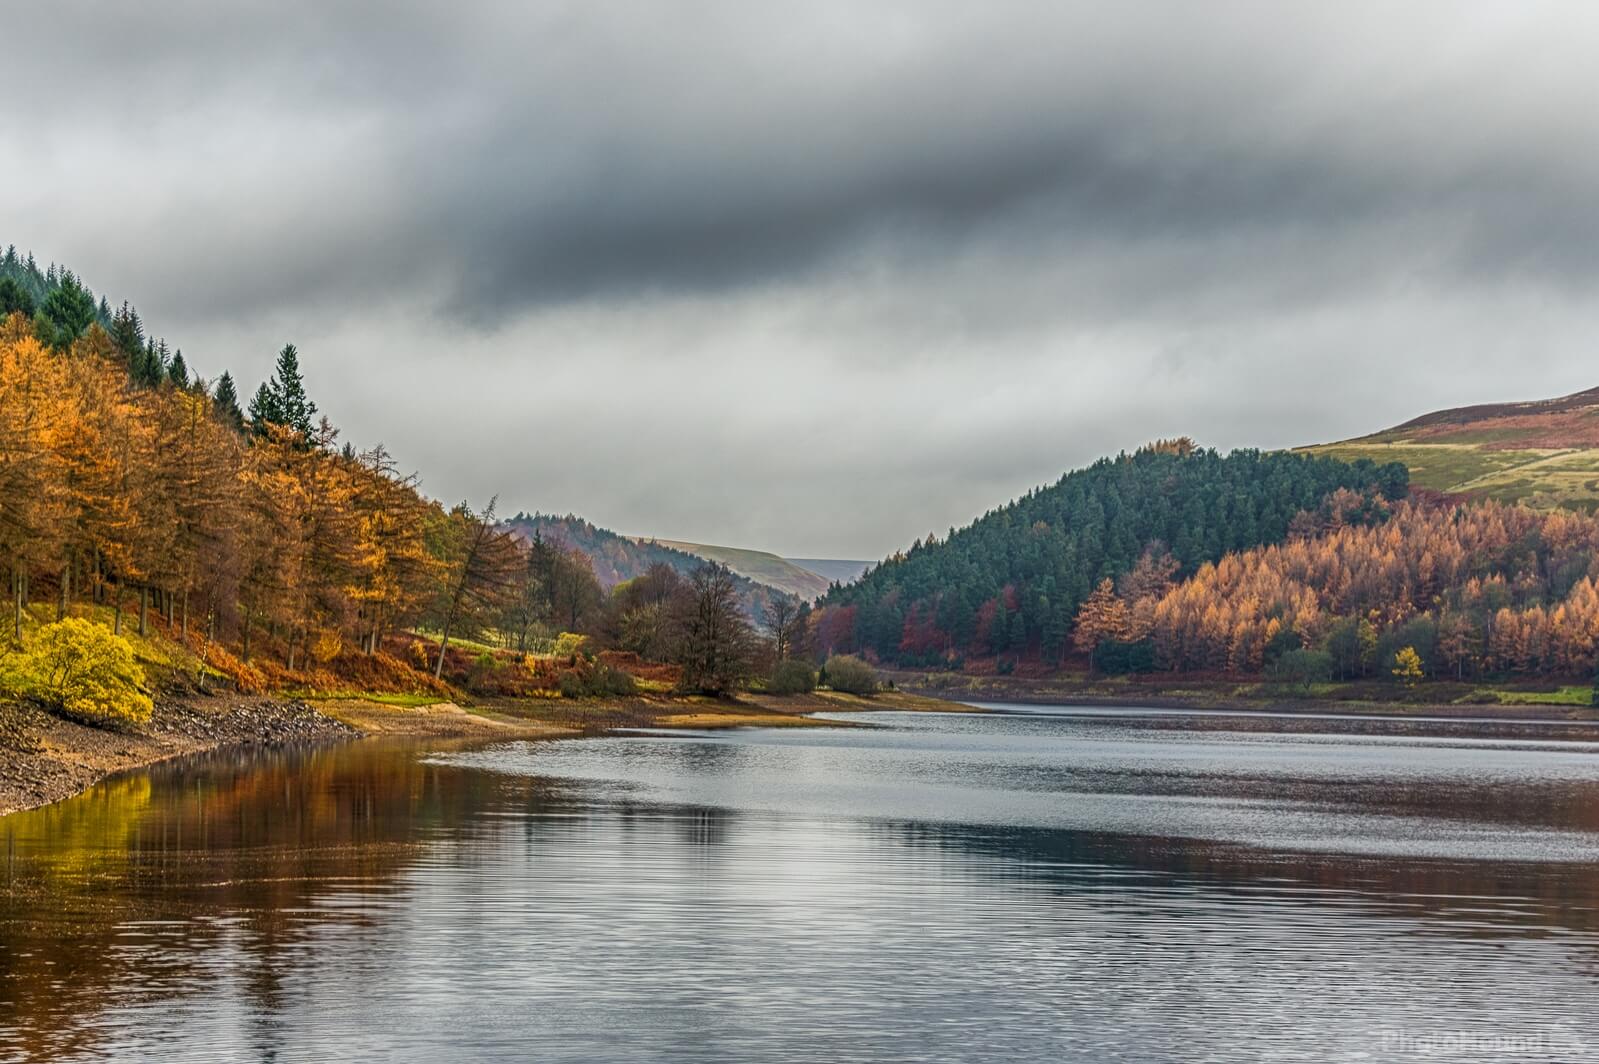 Image of Derwent Reservoir by Andy Killingbeck